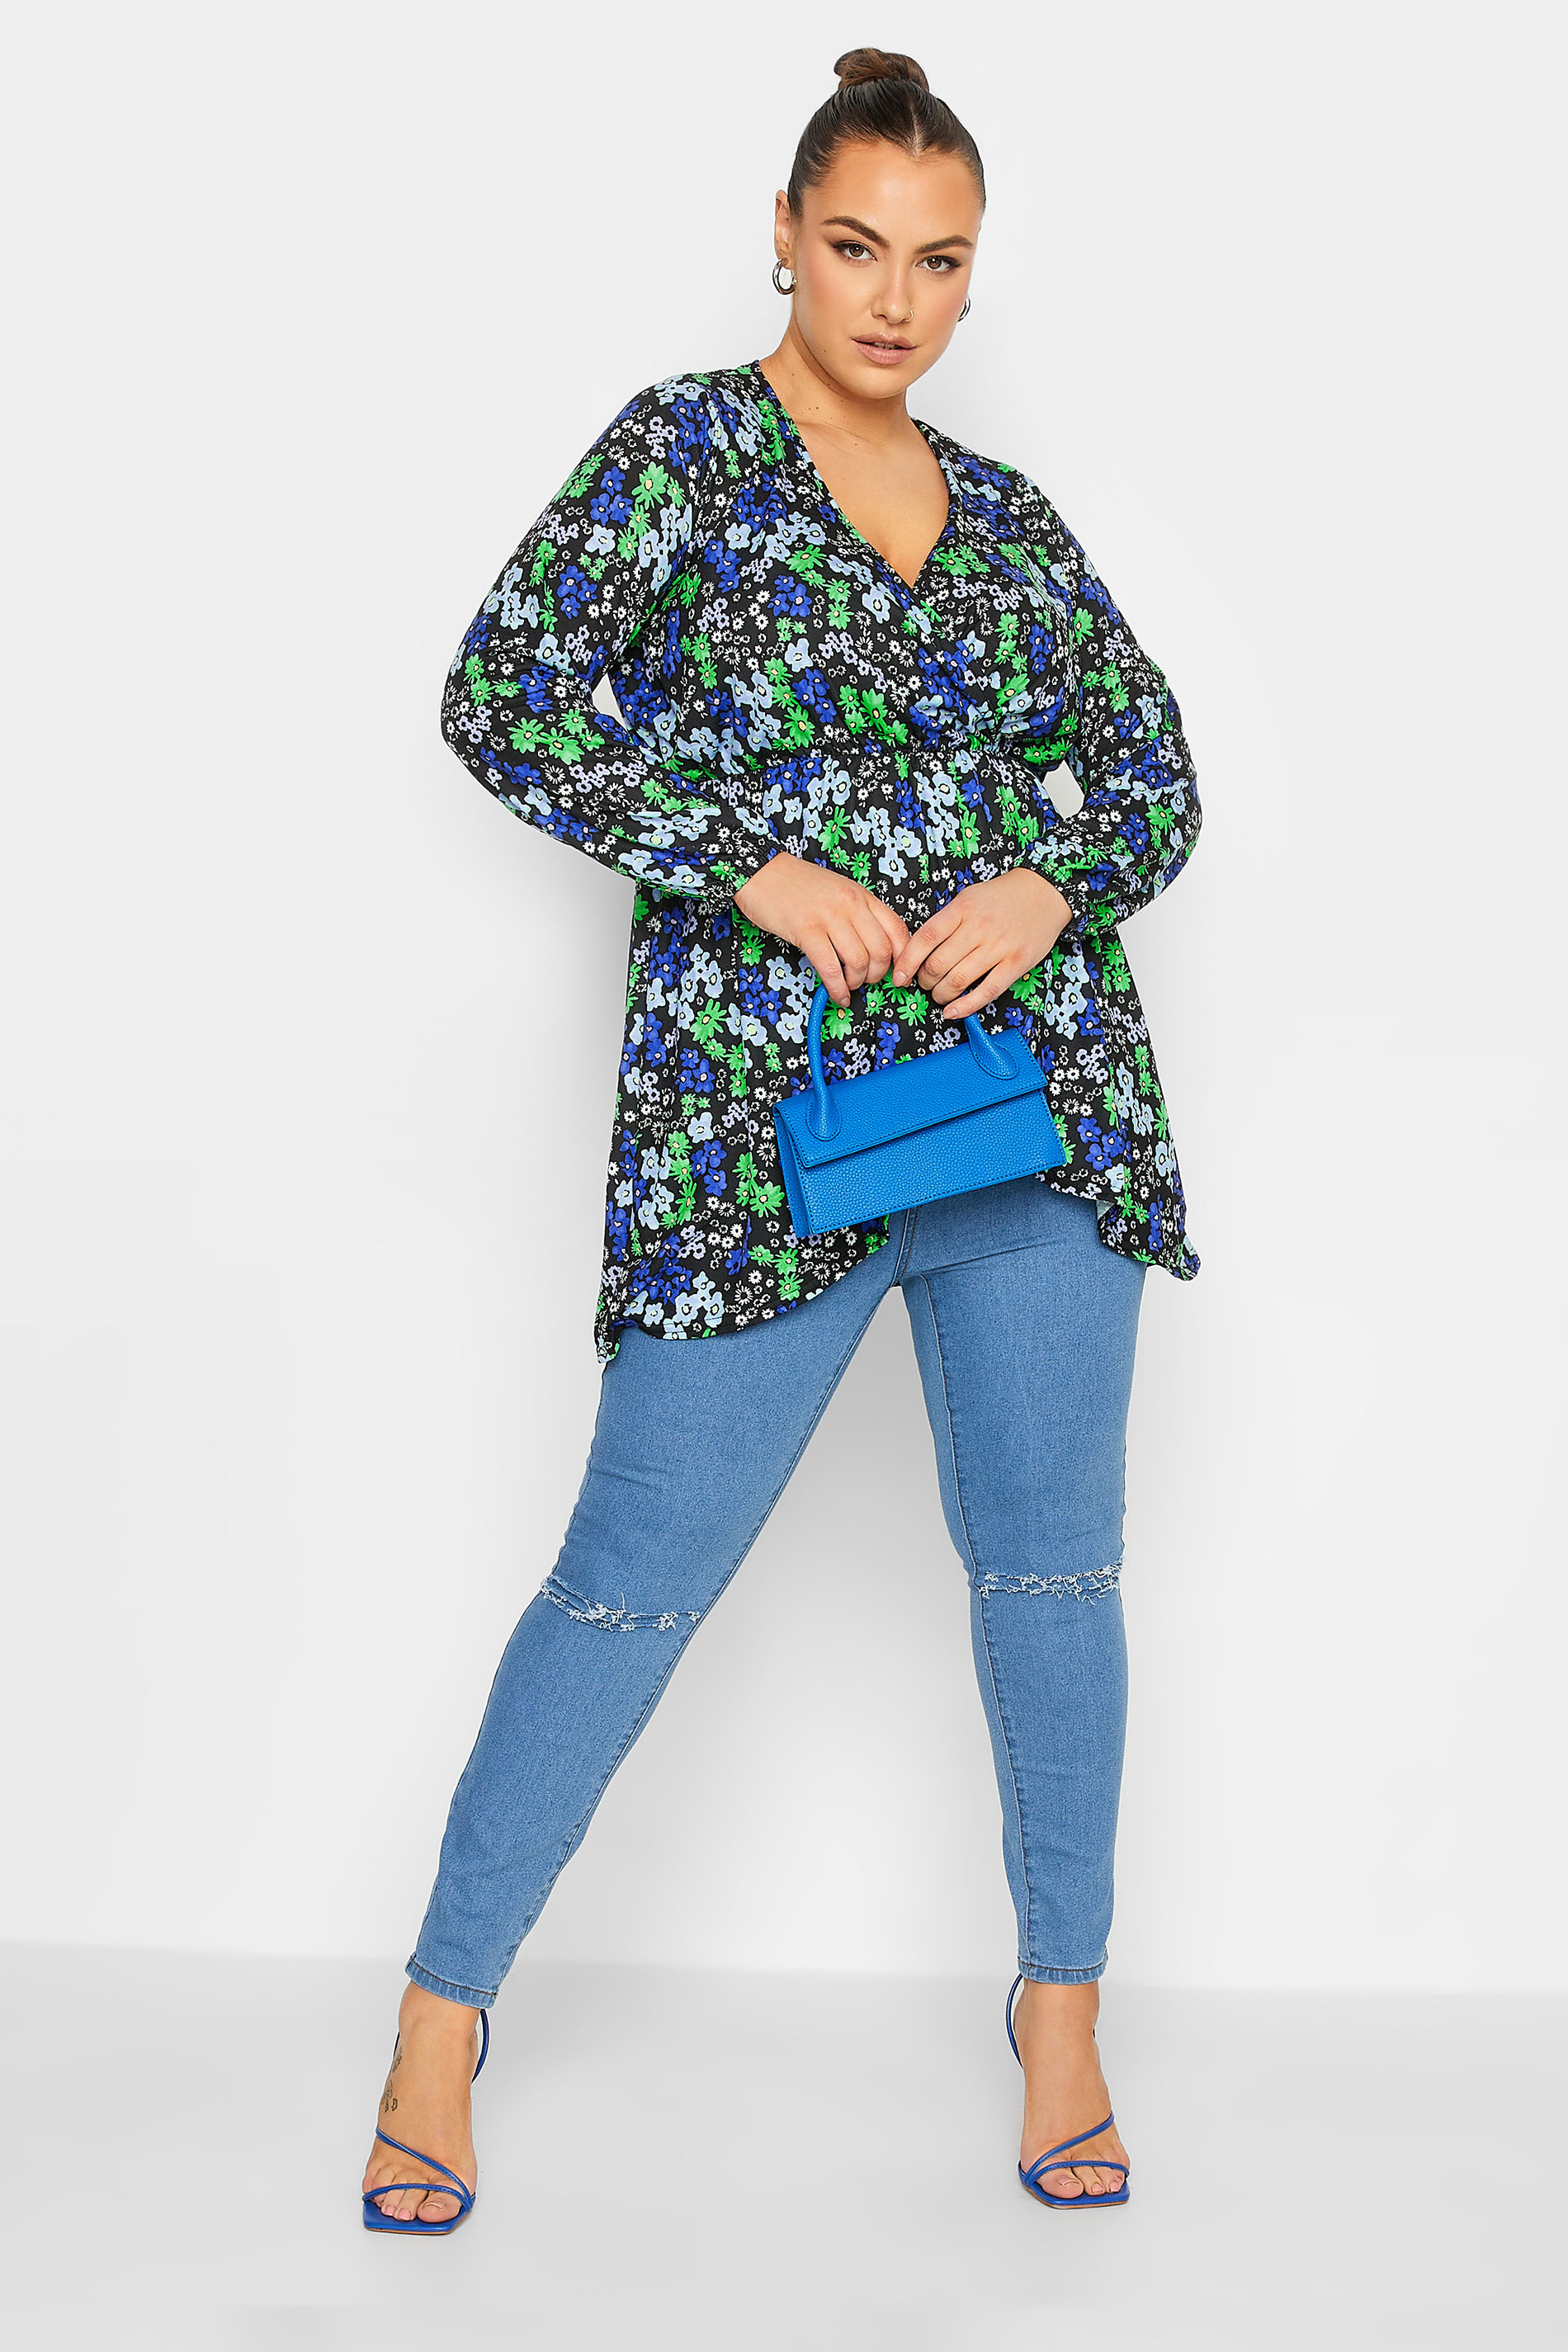 LIMITED COLLECTION Plus Size Blue Floral Print Wrap Top | Yours Clothing 2